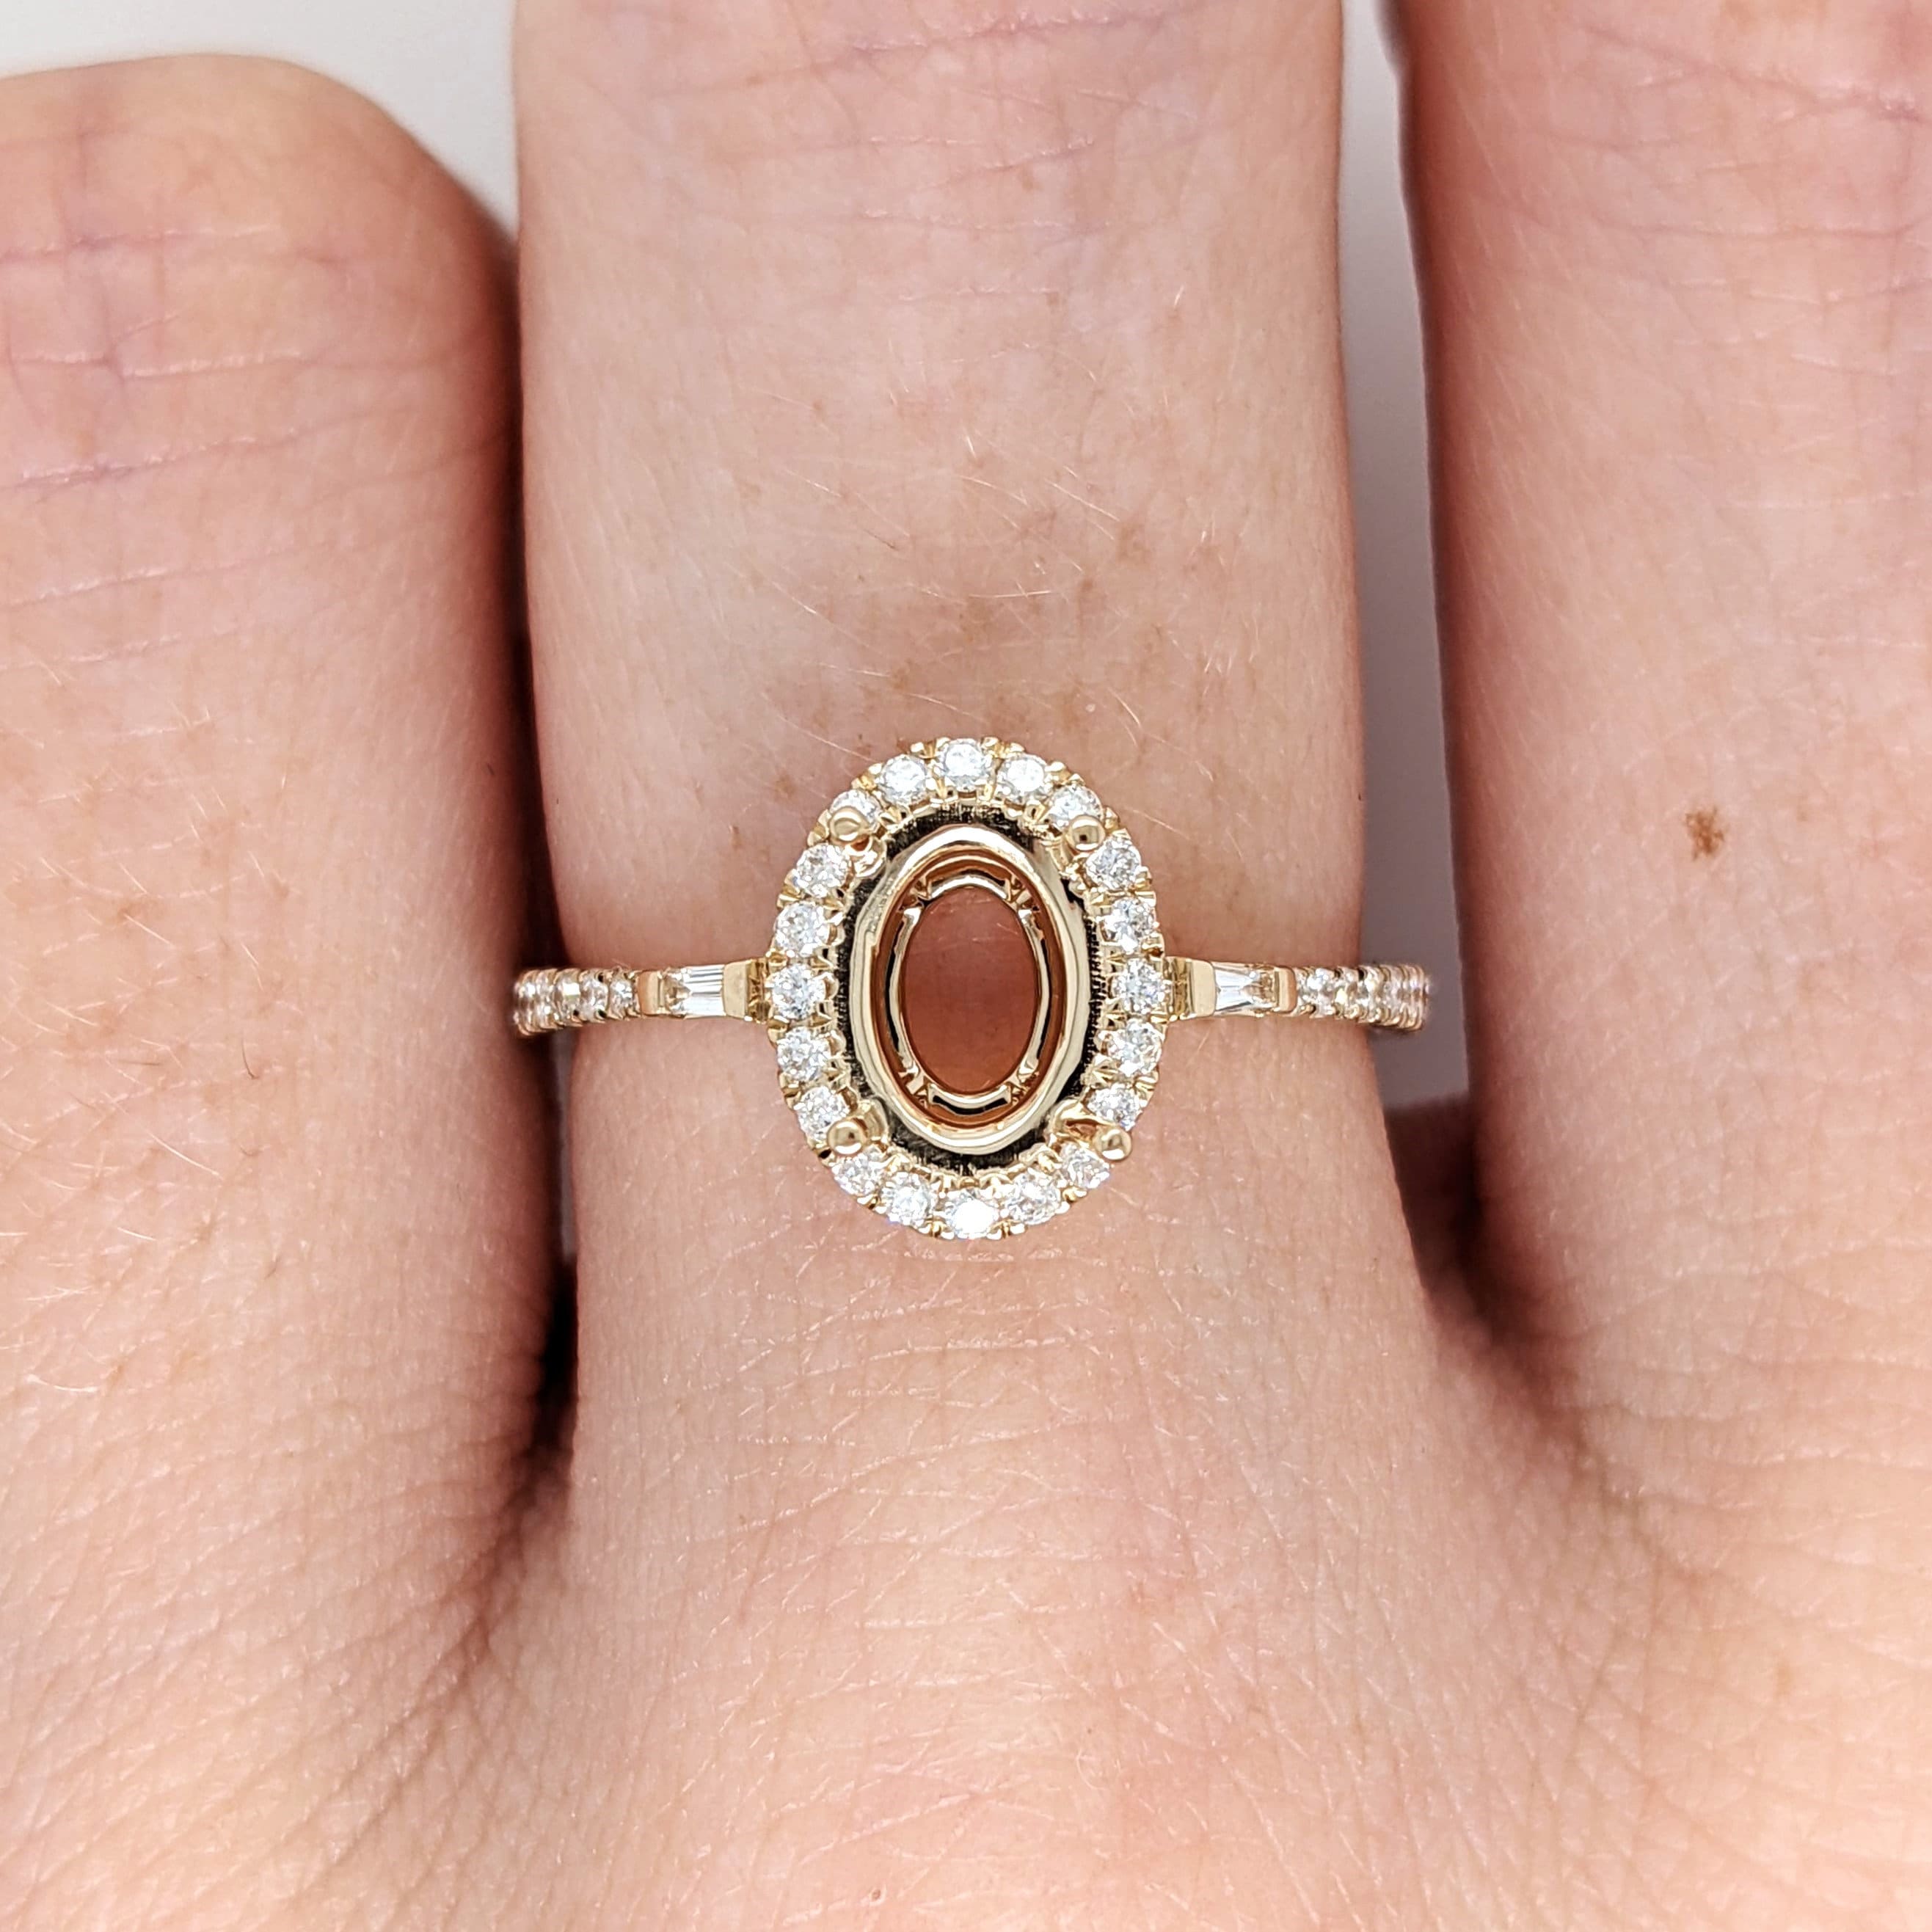 Engagement Ring Setting in 14K Solid White, Yellow, or Rose Gold with Diamond Halo & Baguette Diamonds || Oval 10x8mm || Customizable